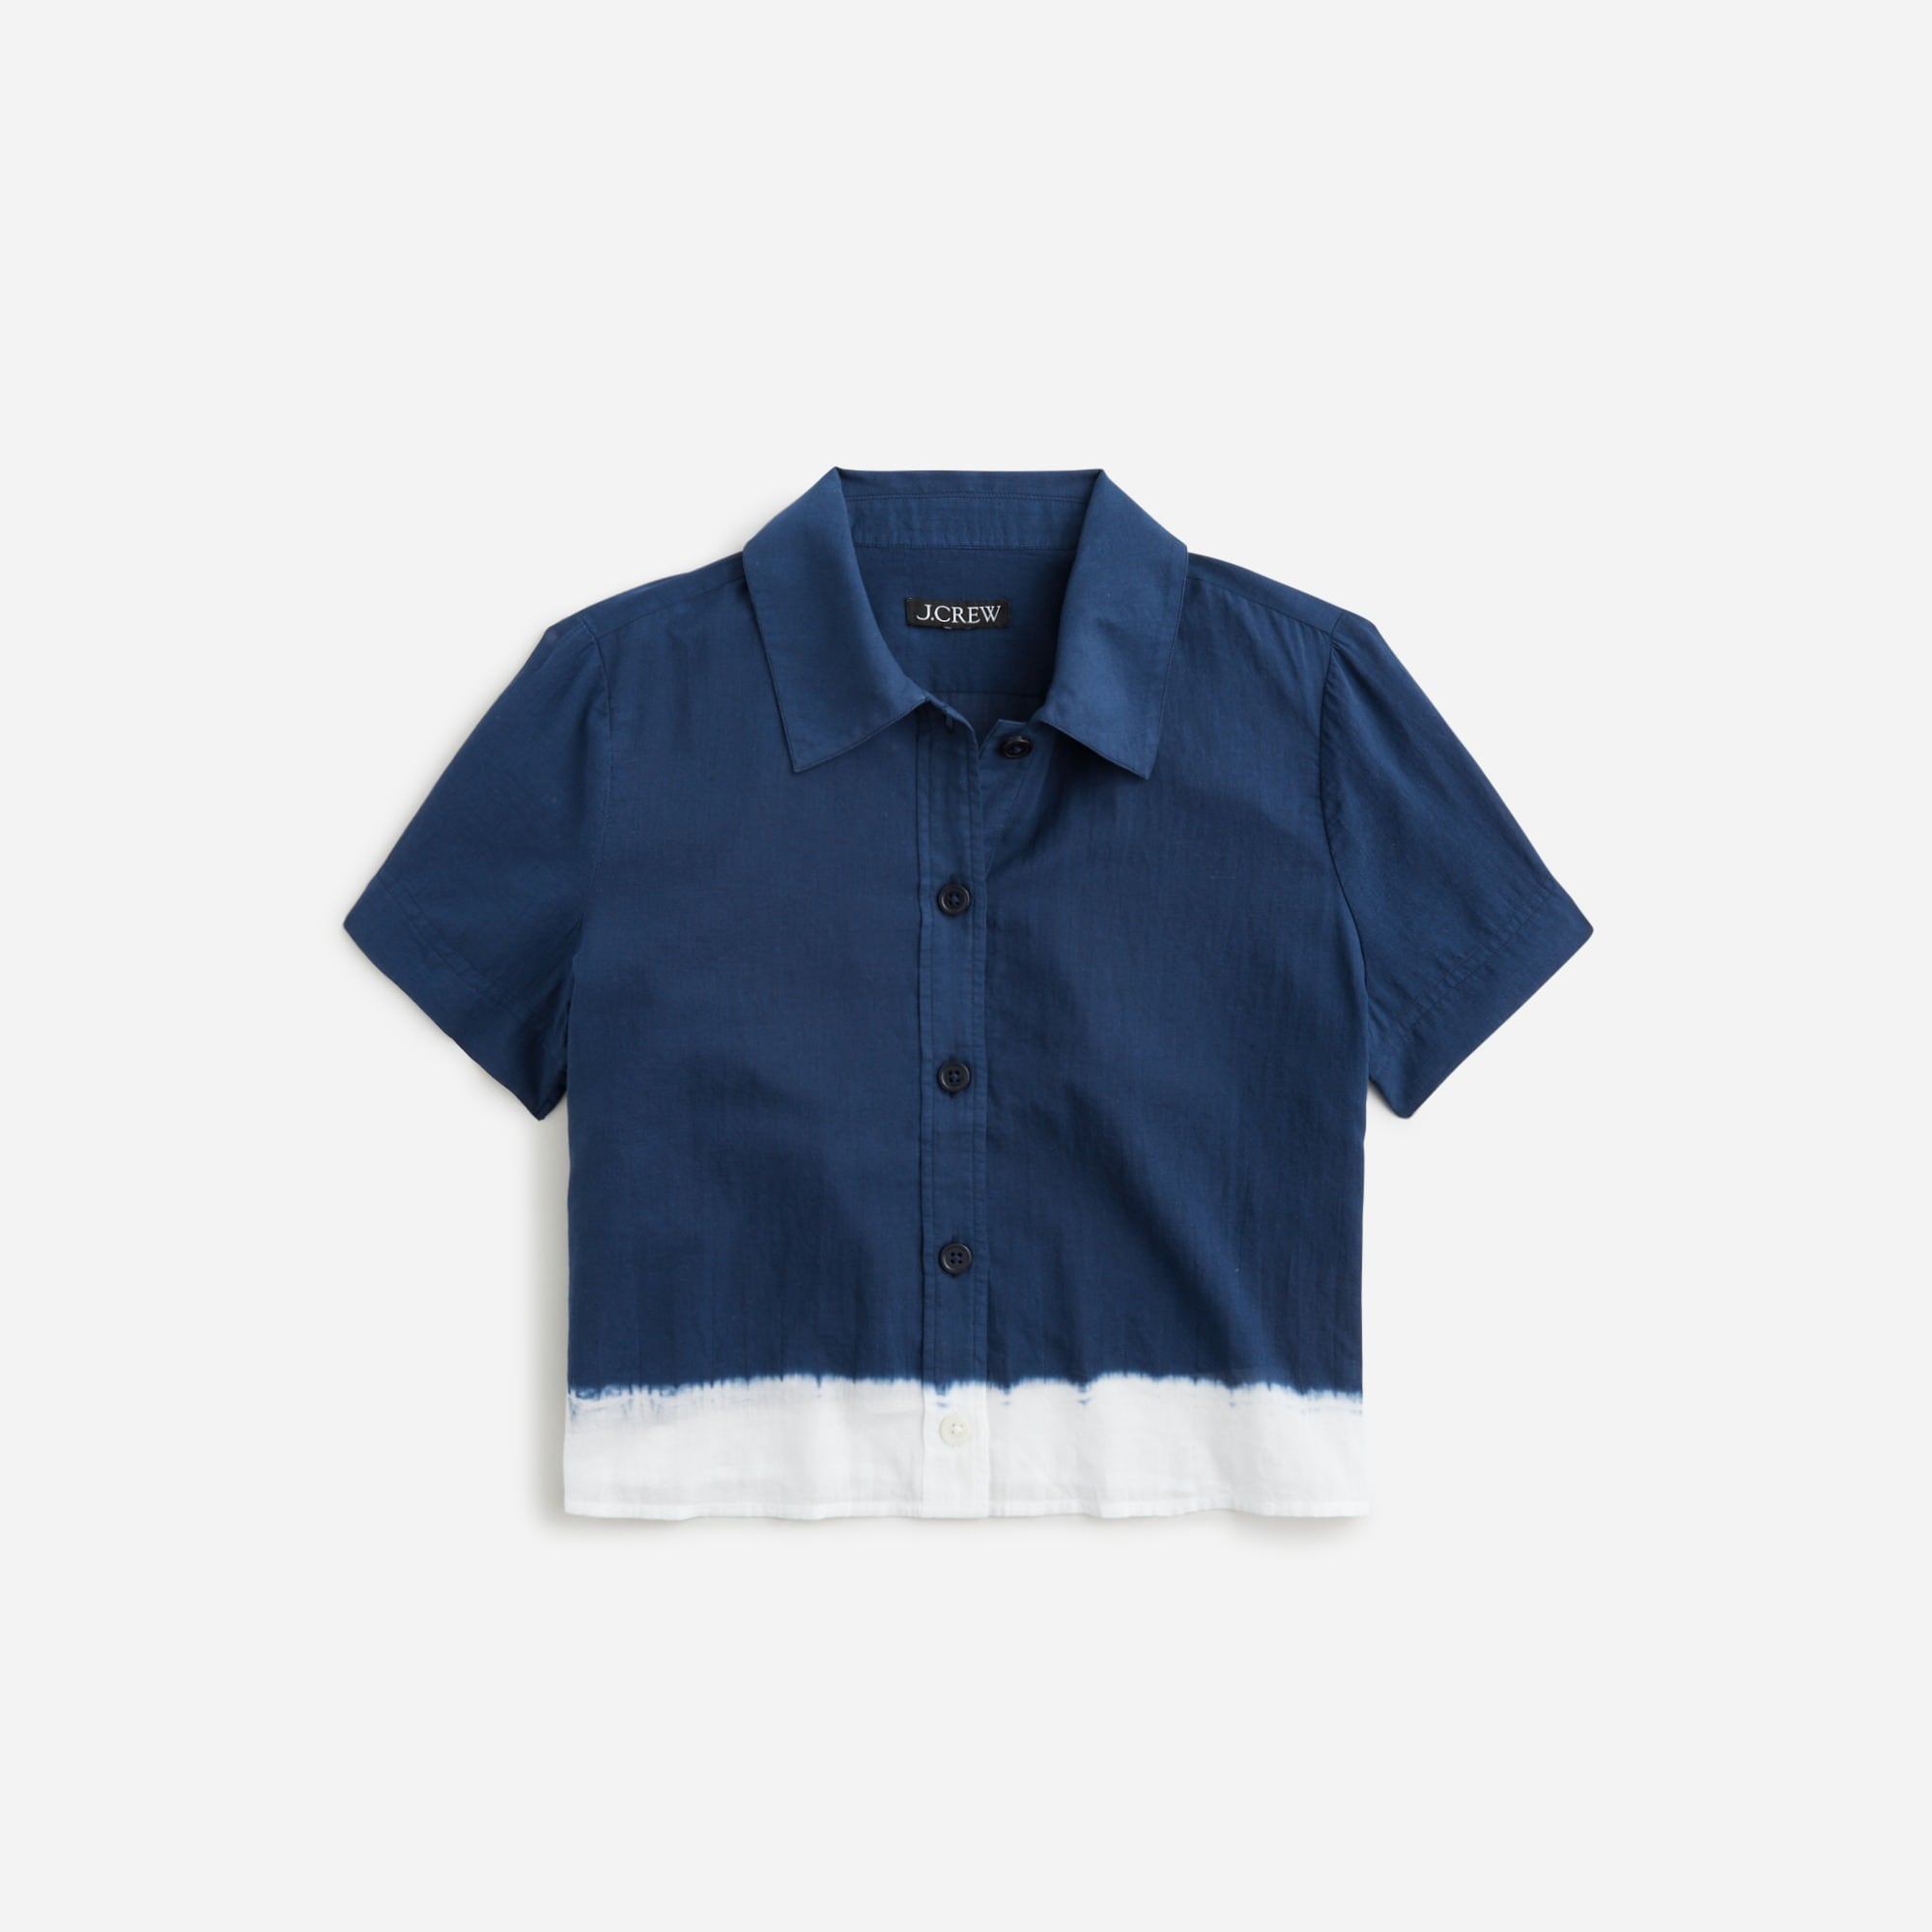  Dip-dyed gamine shirt in cotton voile